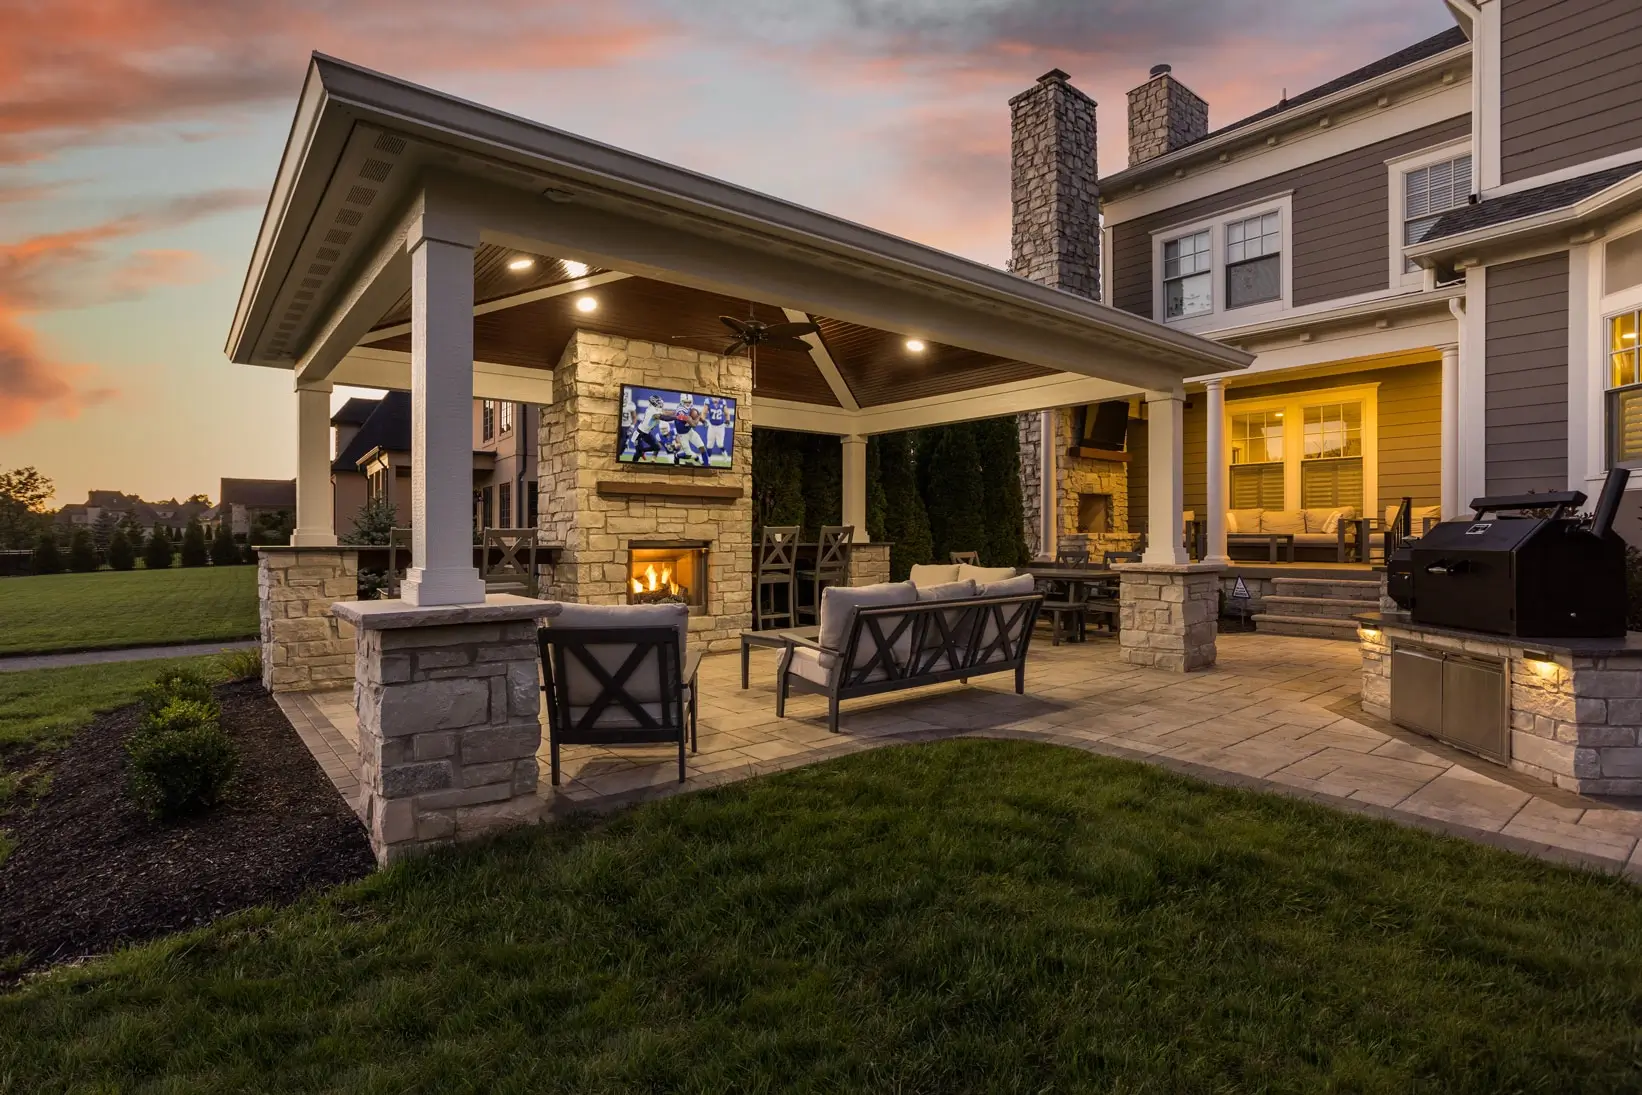 BPI outdoor TV and lights in outdoor living space with sunset in background